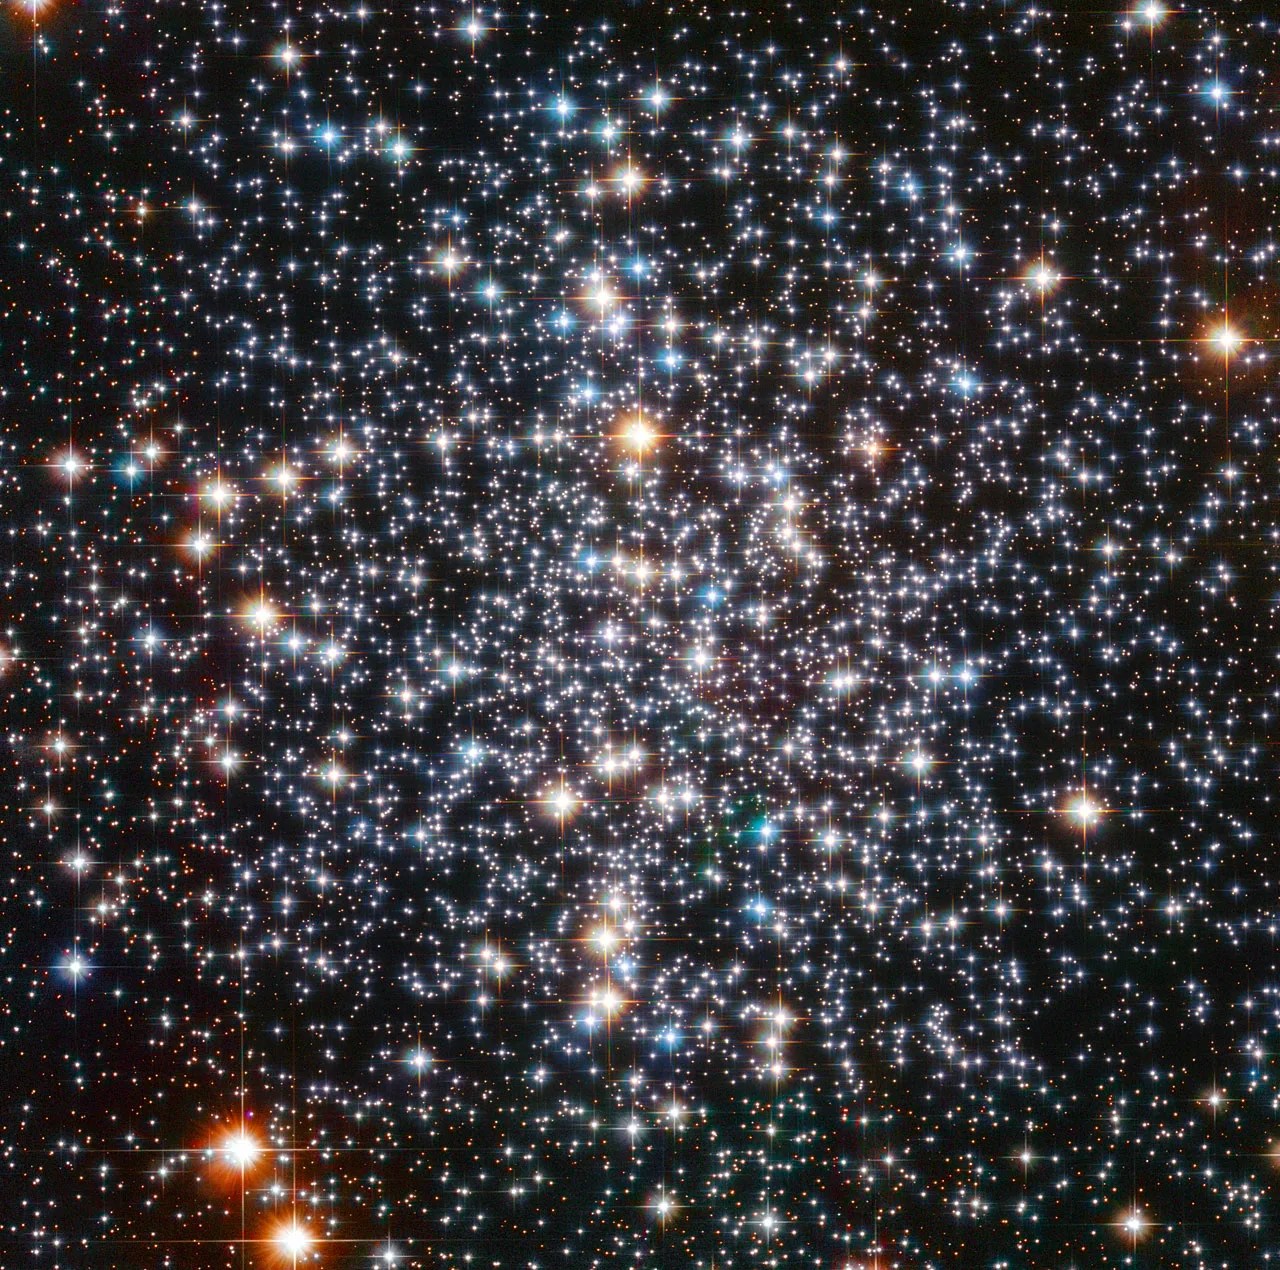 Hubble view of M4, a colorful ball of thousands of stars